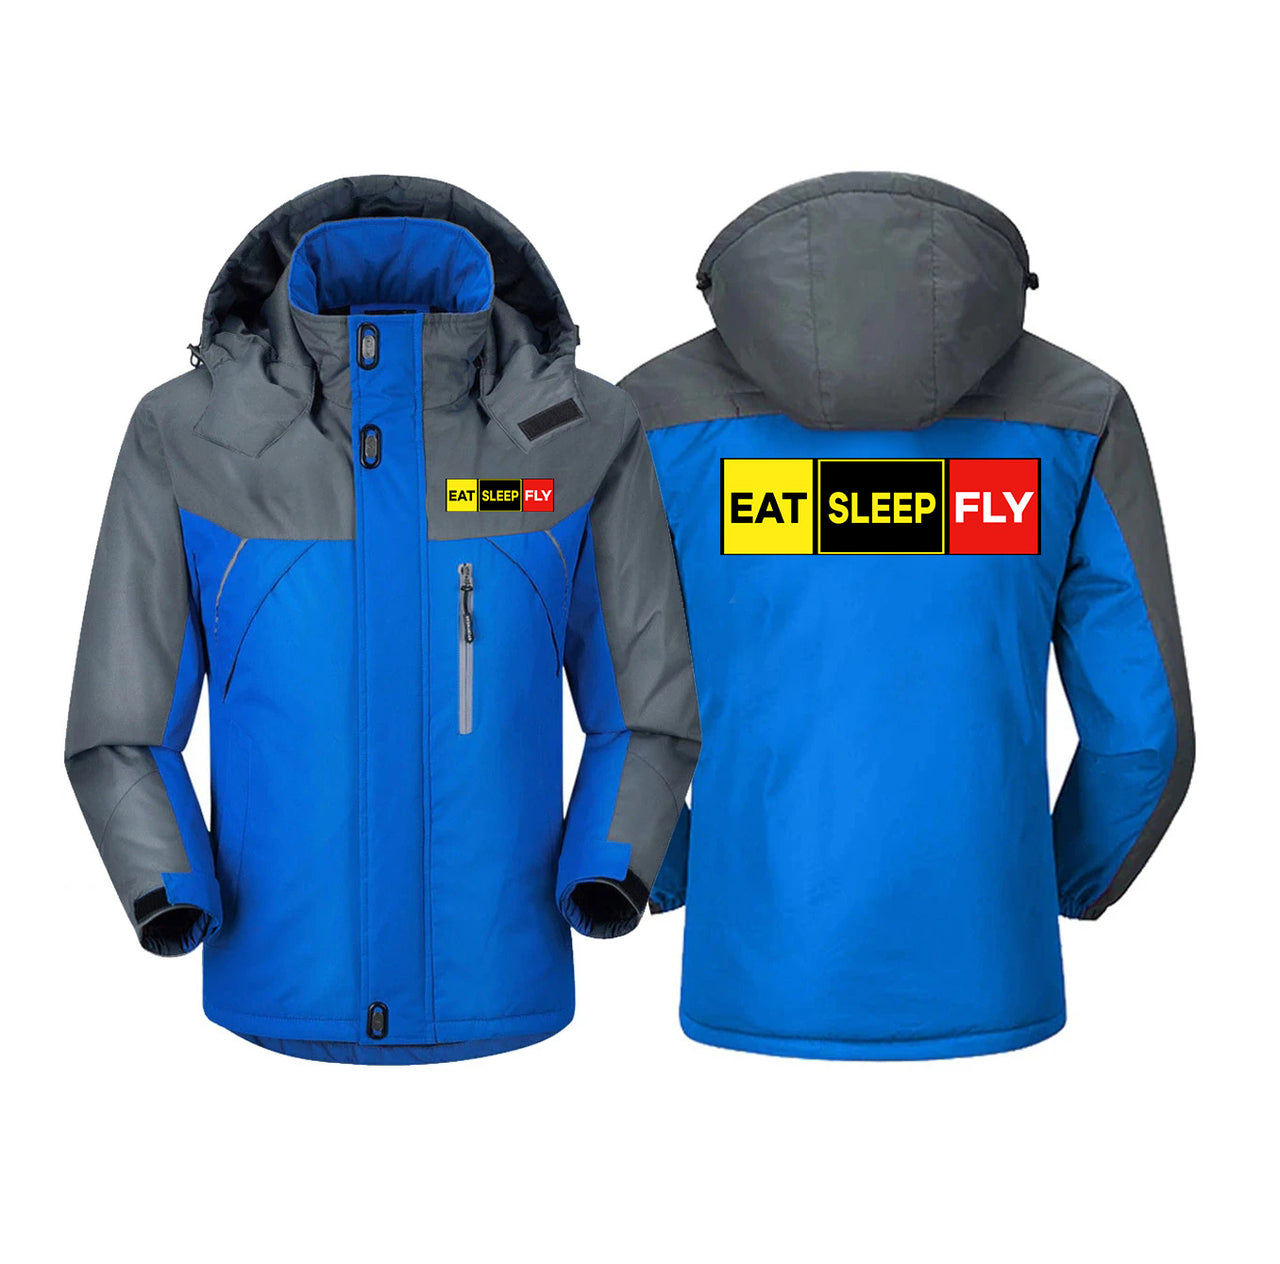 Eat Sleep Fly (Colourful) Designed Thick Winter Jackets